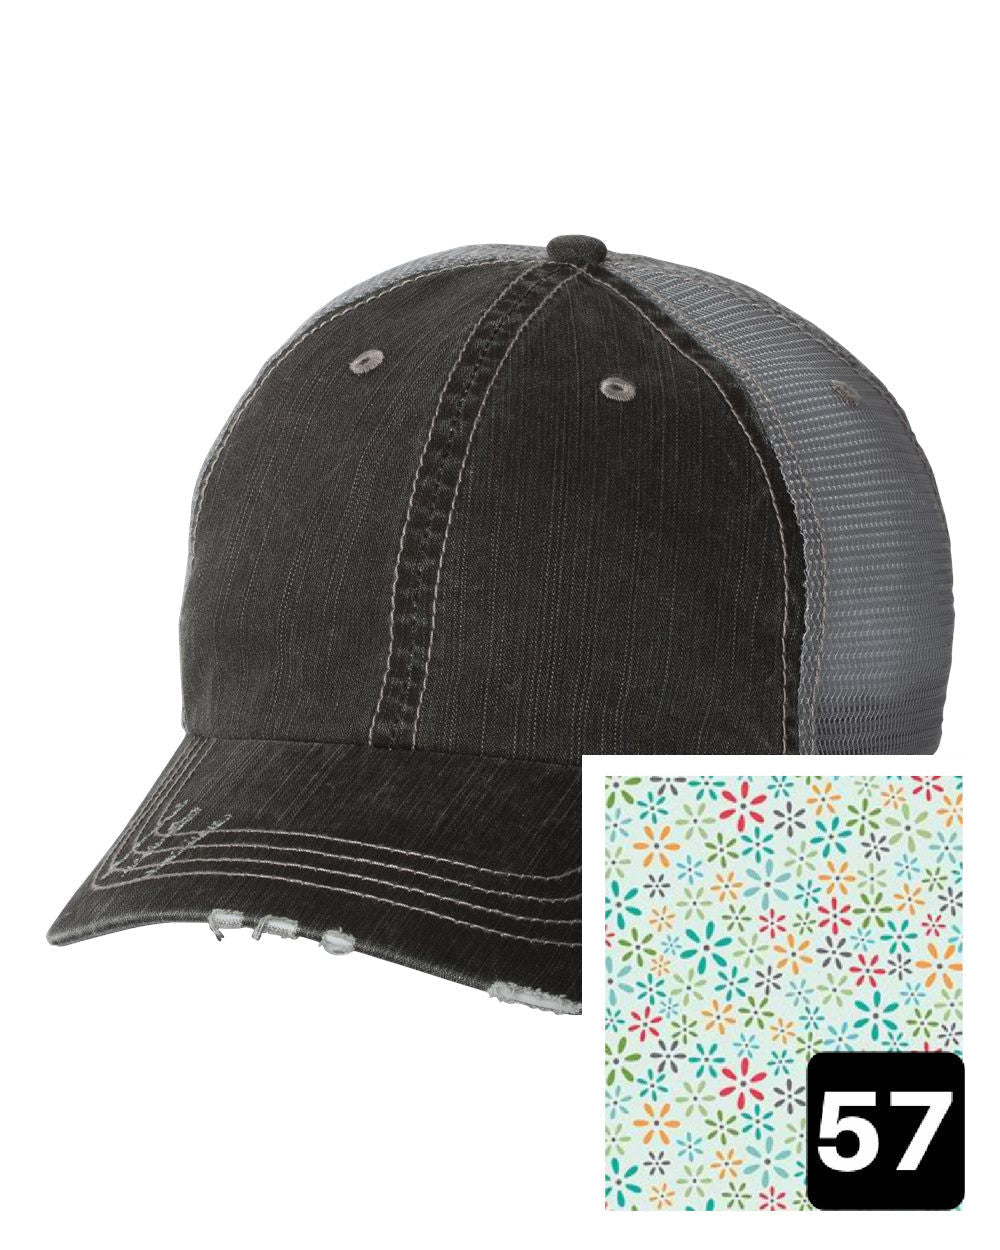 gray distressed trucker hat with white daisy on yellow fabric state of Virginia